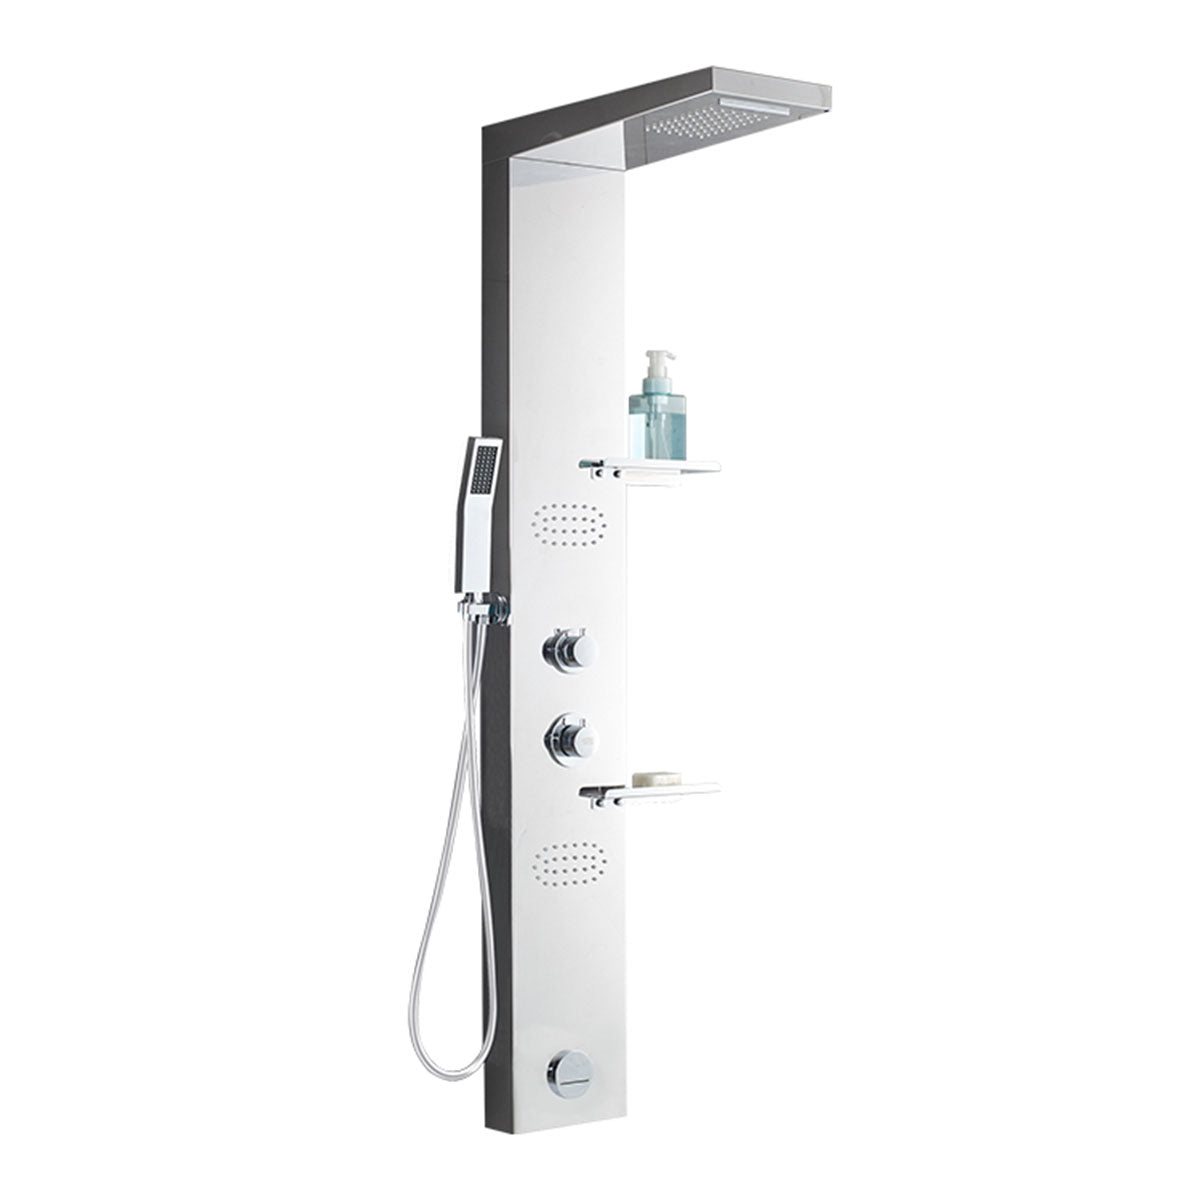 SP-5539 Stainless Steel Shower Panel (Chrome) - iStyle Bath